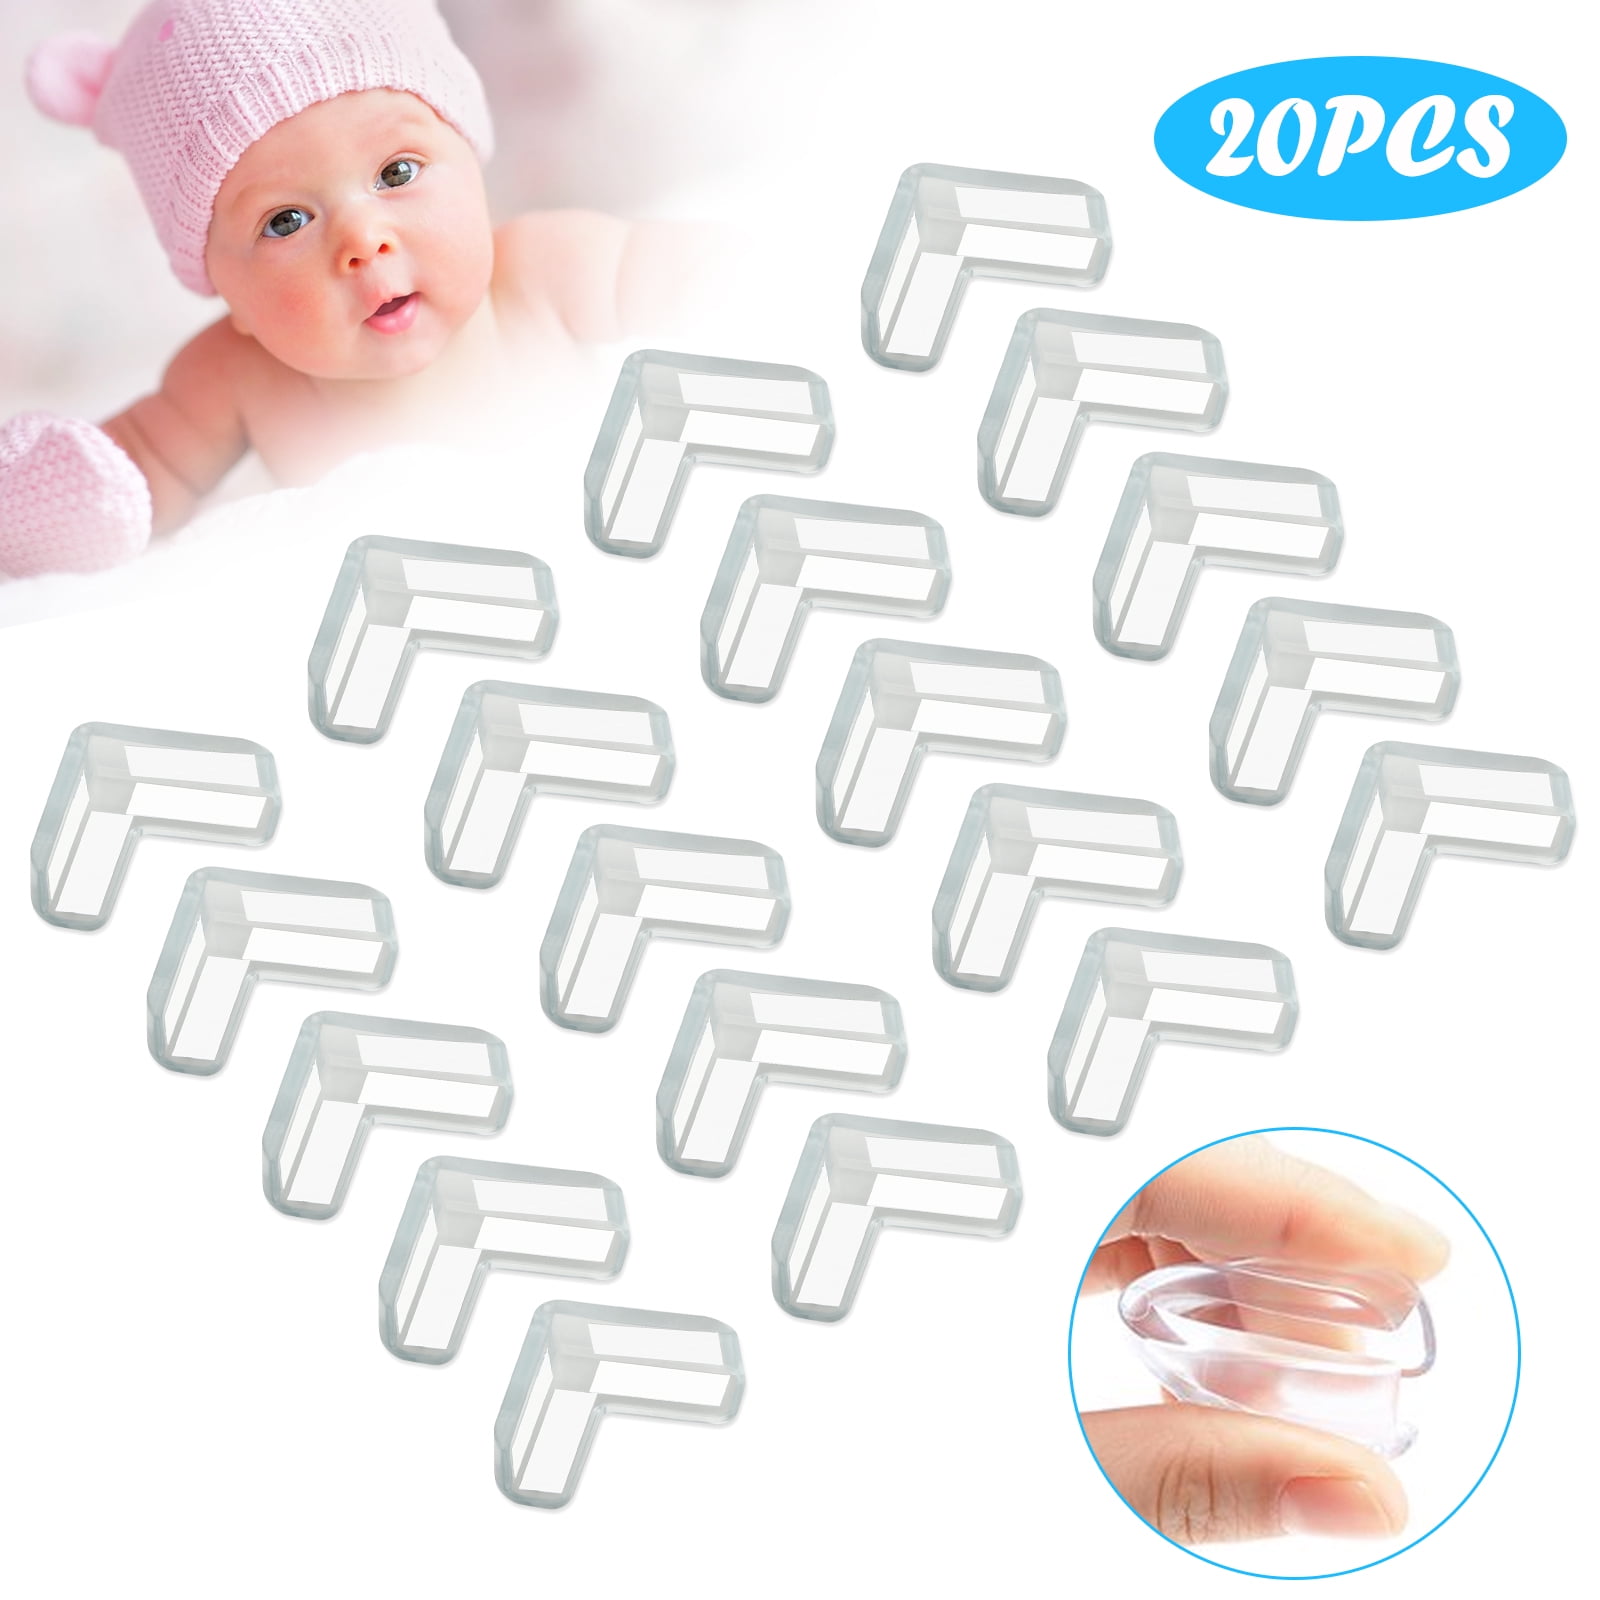 Foam Bumper Table Edge Baby Safety Clear Safe Corner Guard Strip Protector 